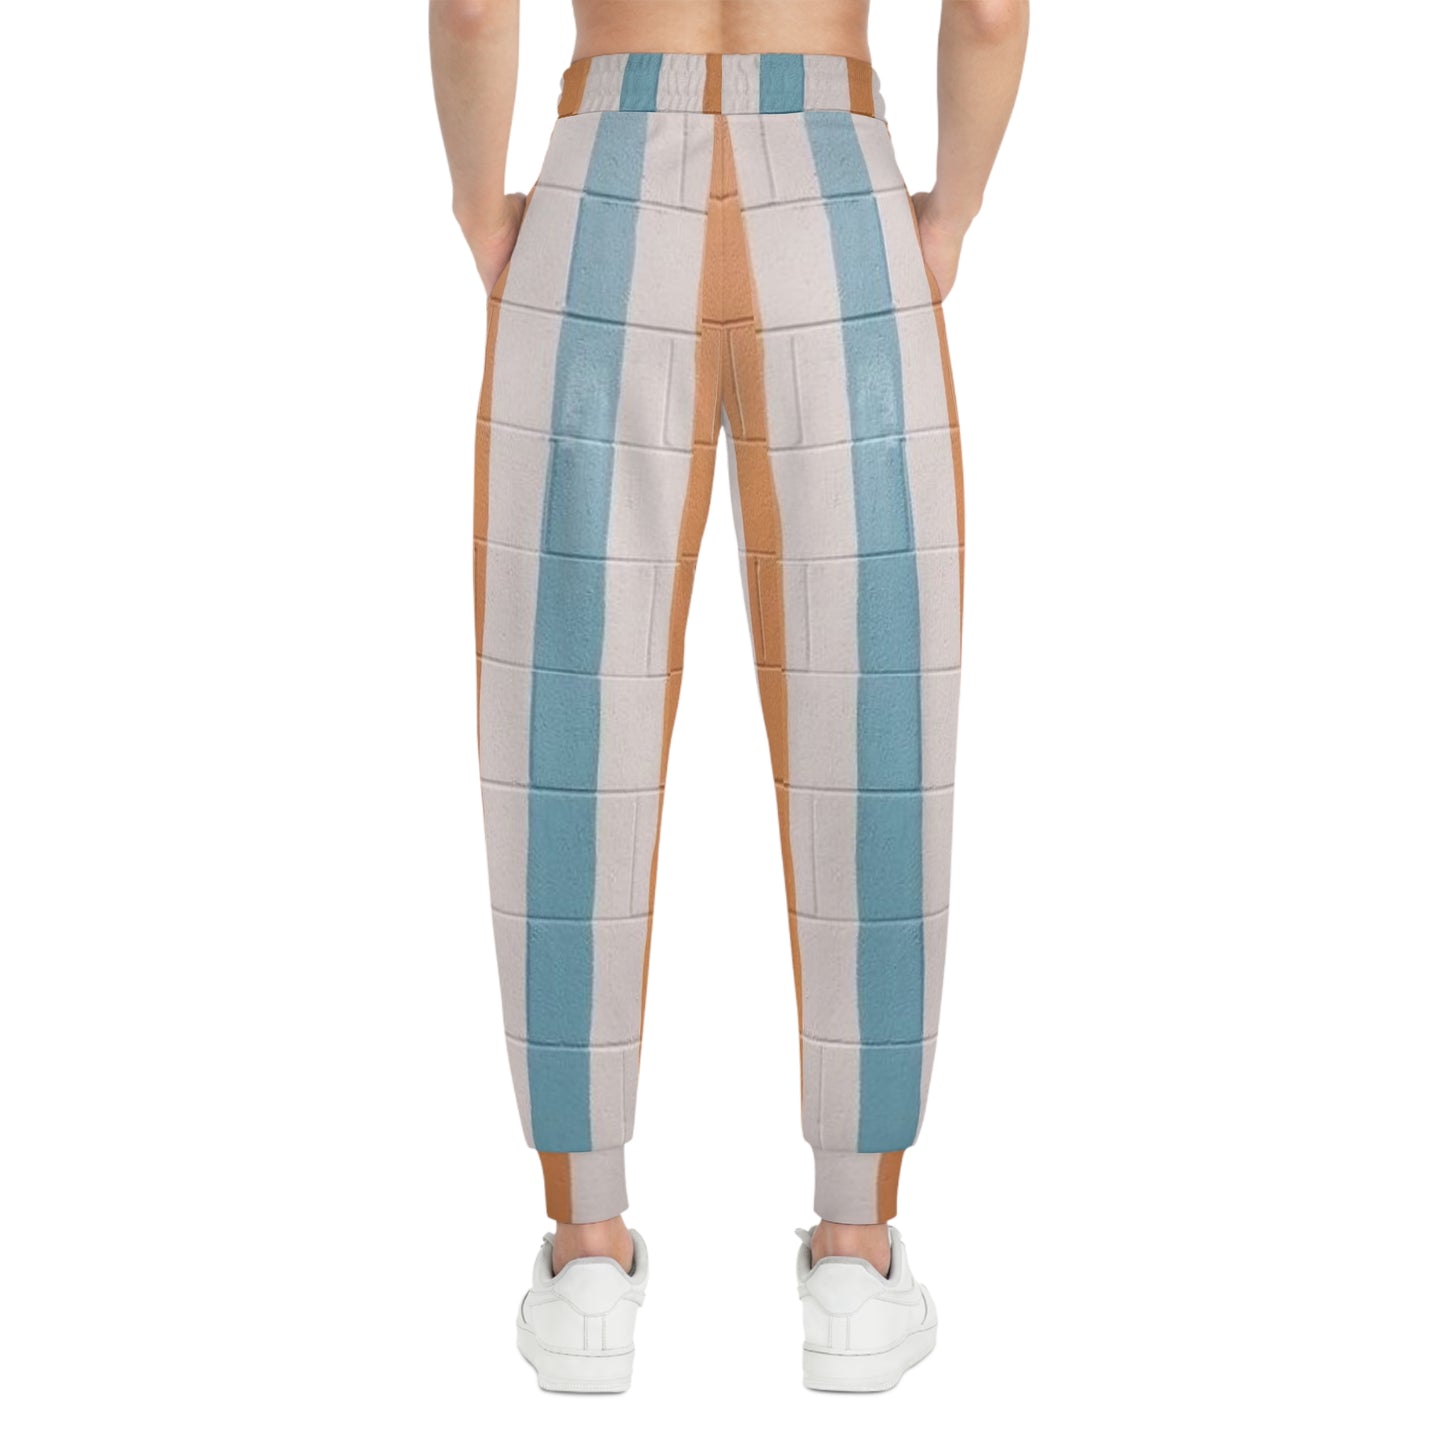 Athletic Joggers For Women | Stripes